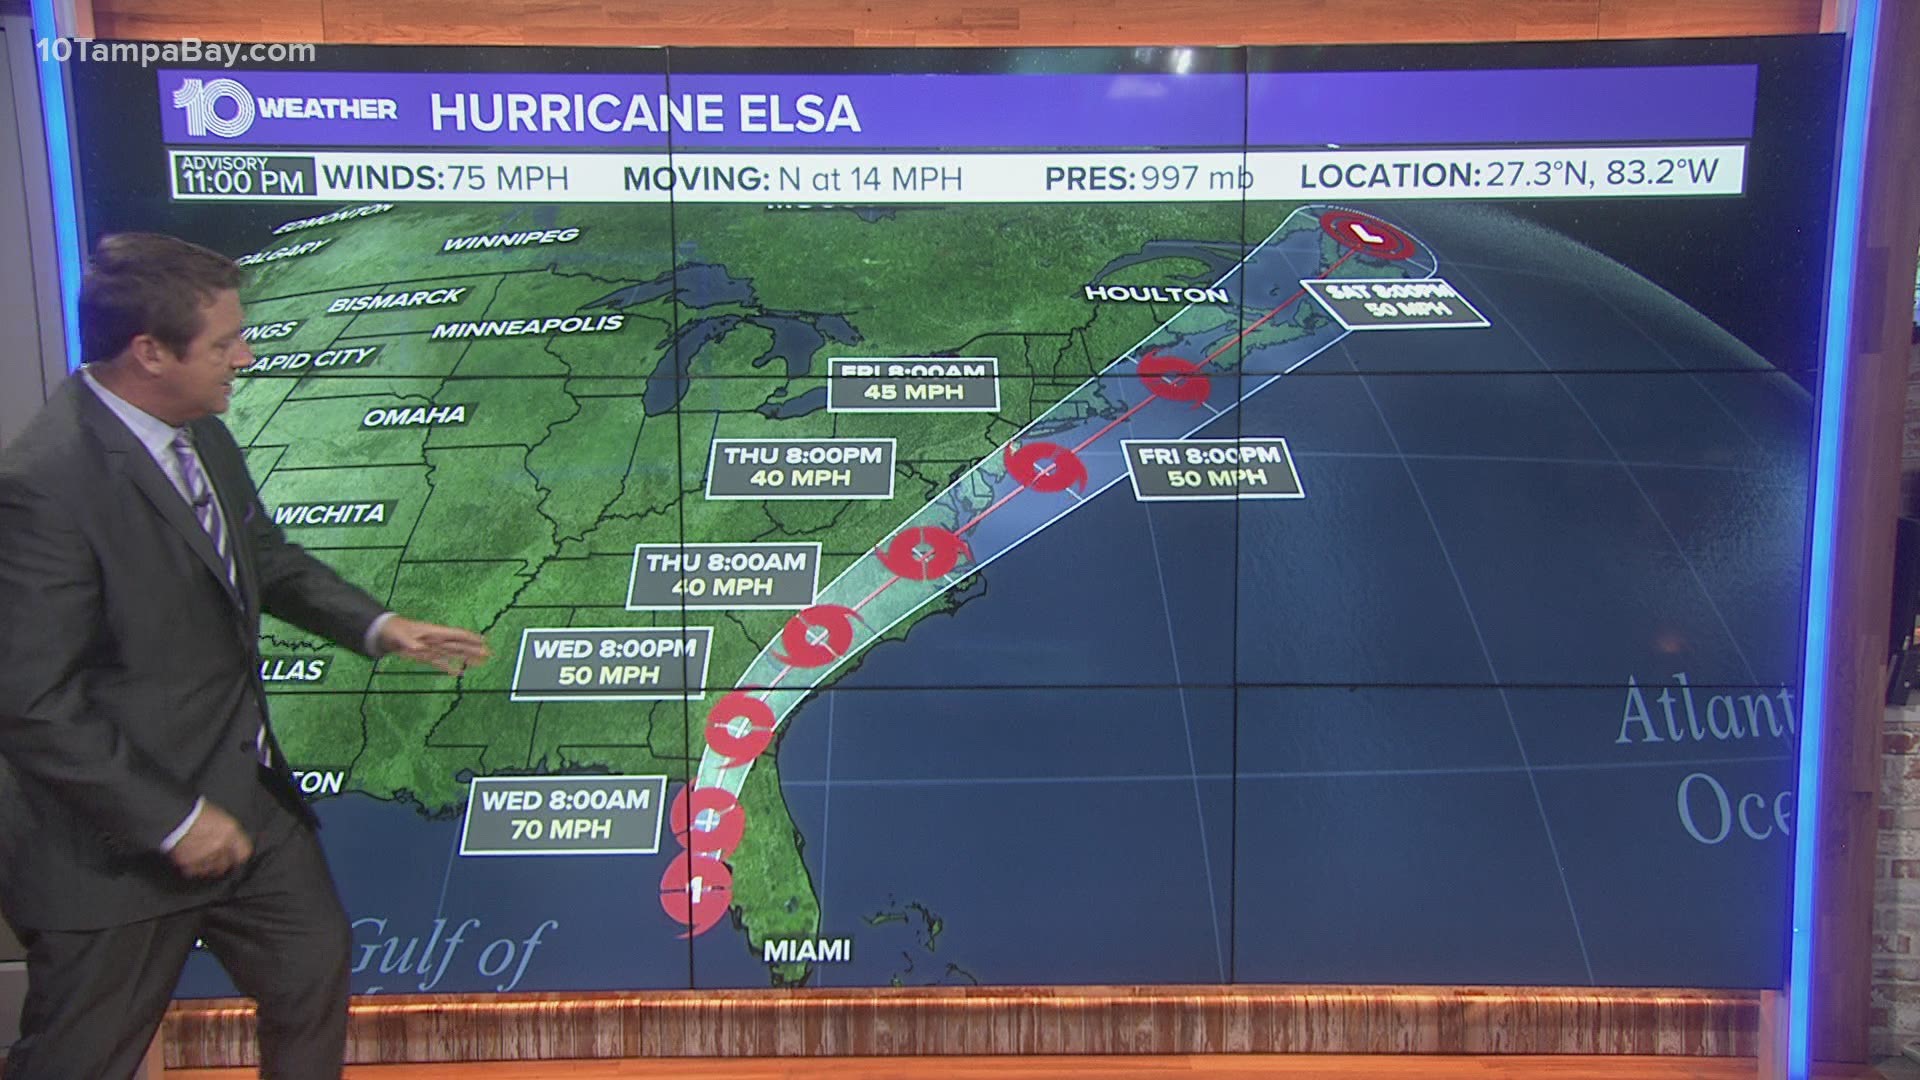 Elsa remains a 75-mph storm as of the National Hurricane Center's 11 p.m. advisory.